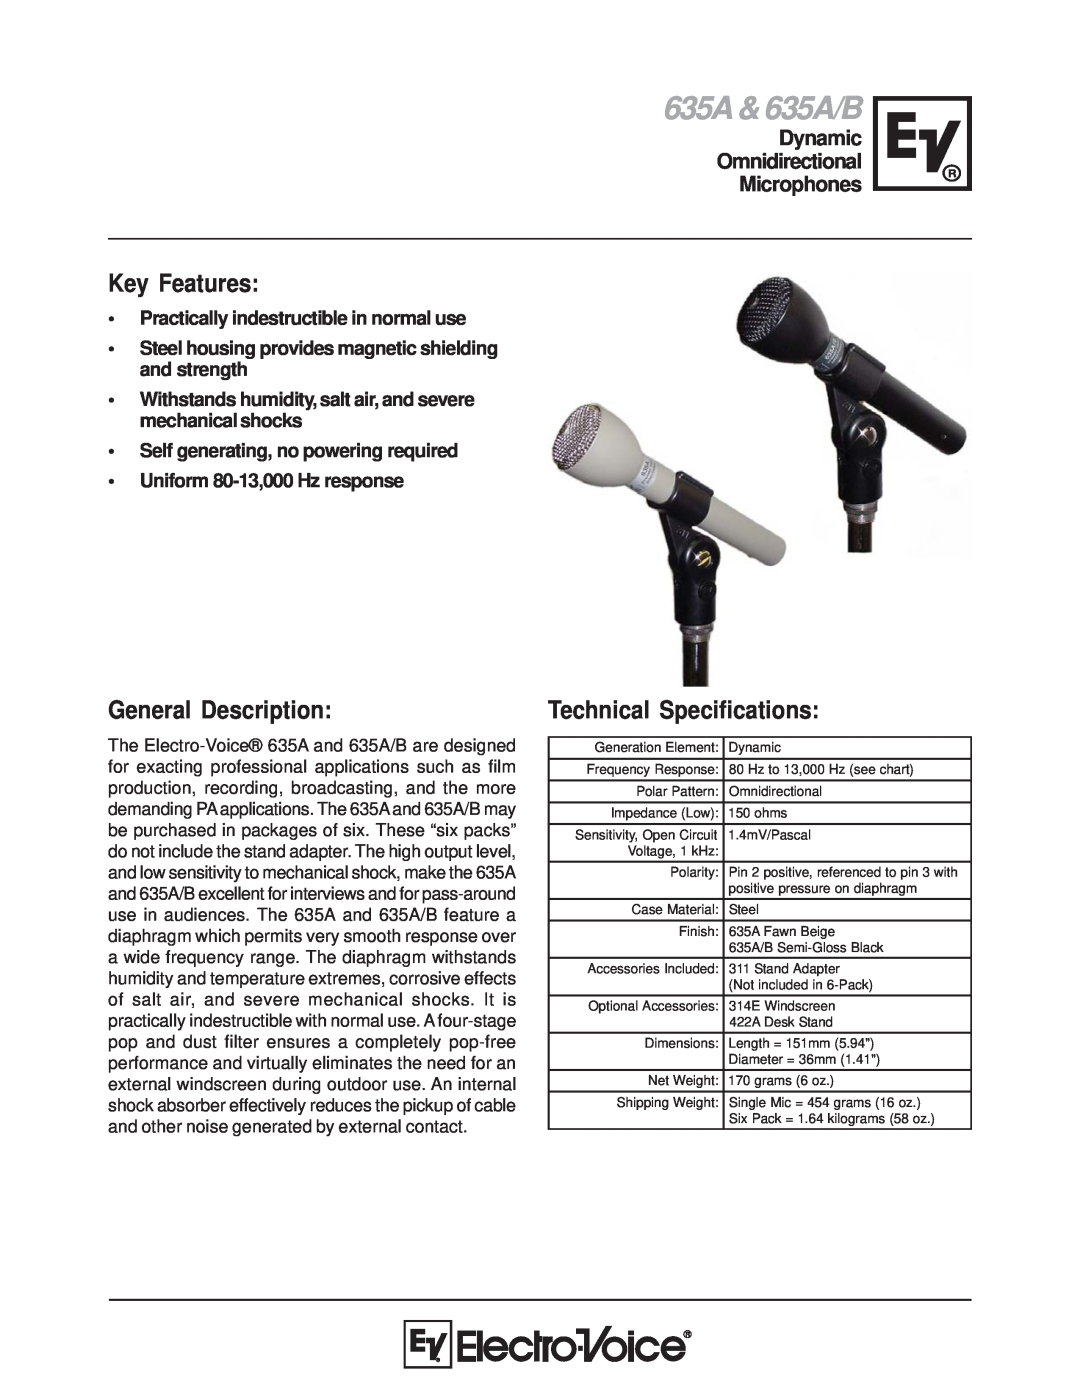 Electro-Voice technical specifications Key Features, General Description, Technical Specifications, 635A & 635A/B 